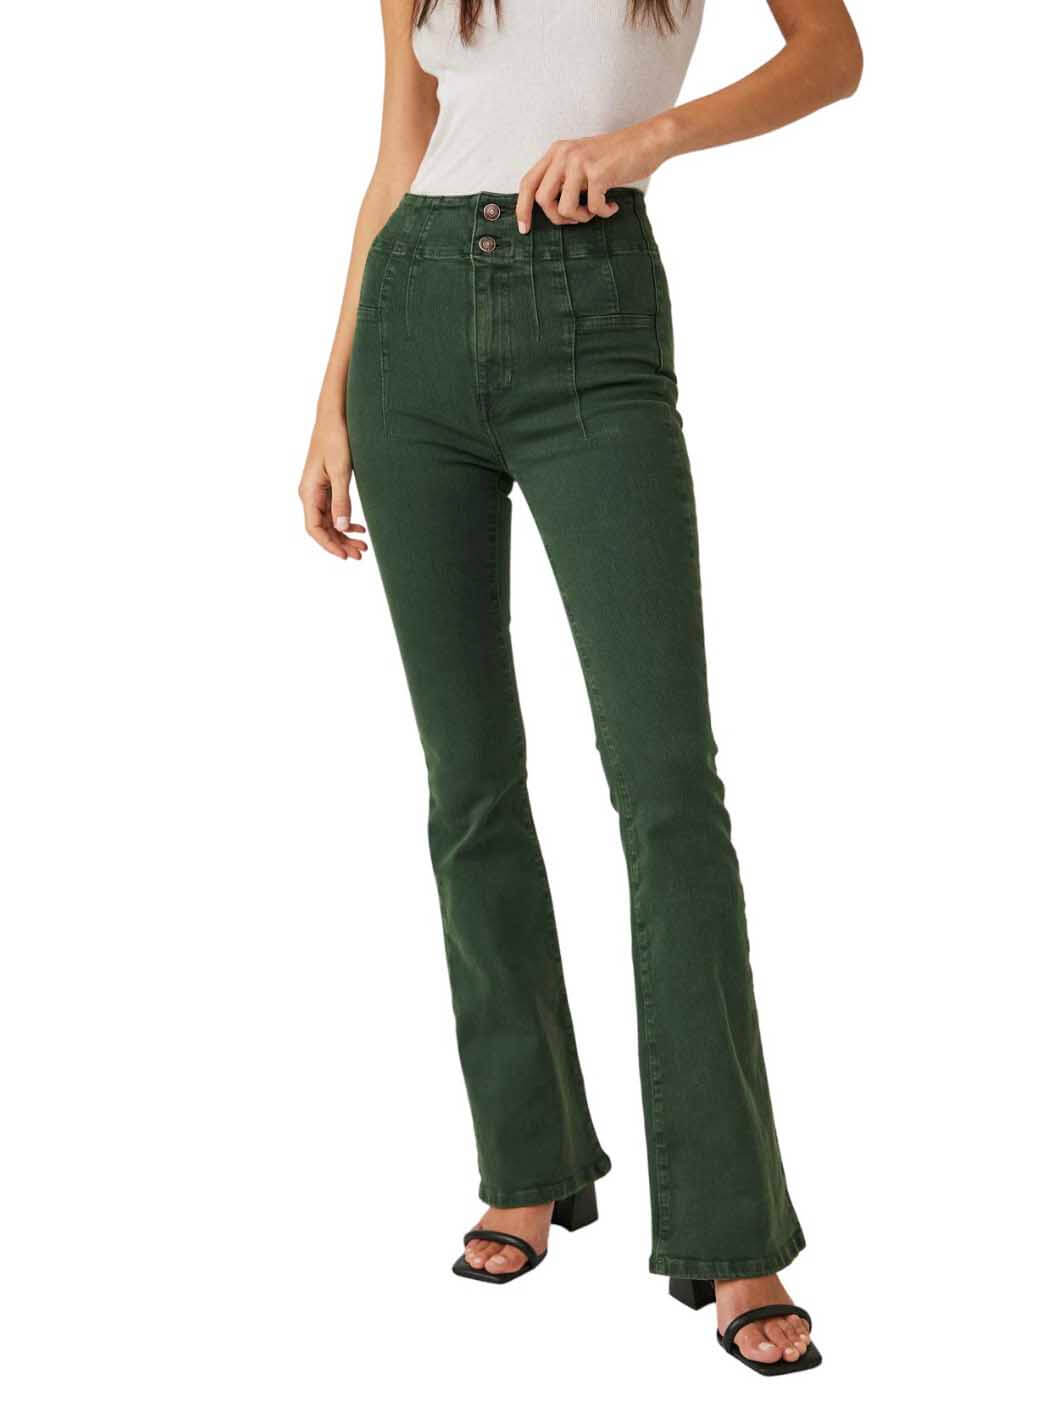 Free People We The Free Jayde Cord Flare Jeans Pine Green Size 31 NEW